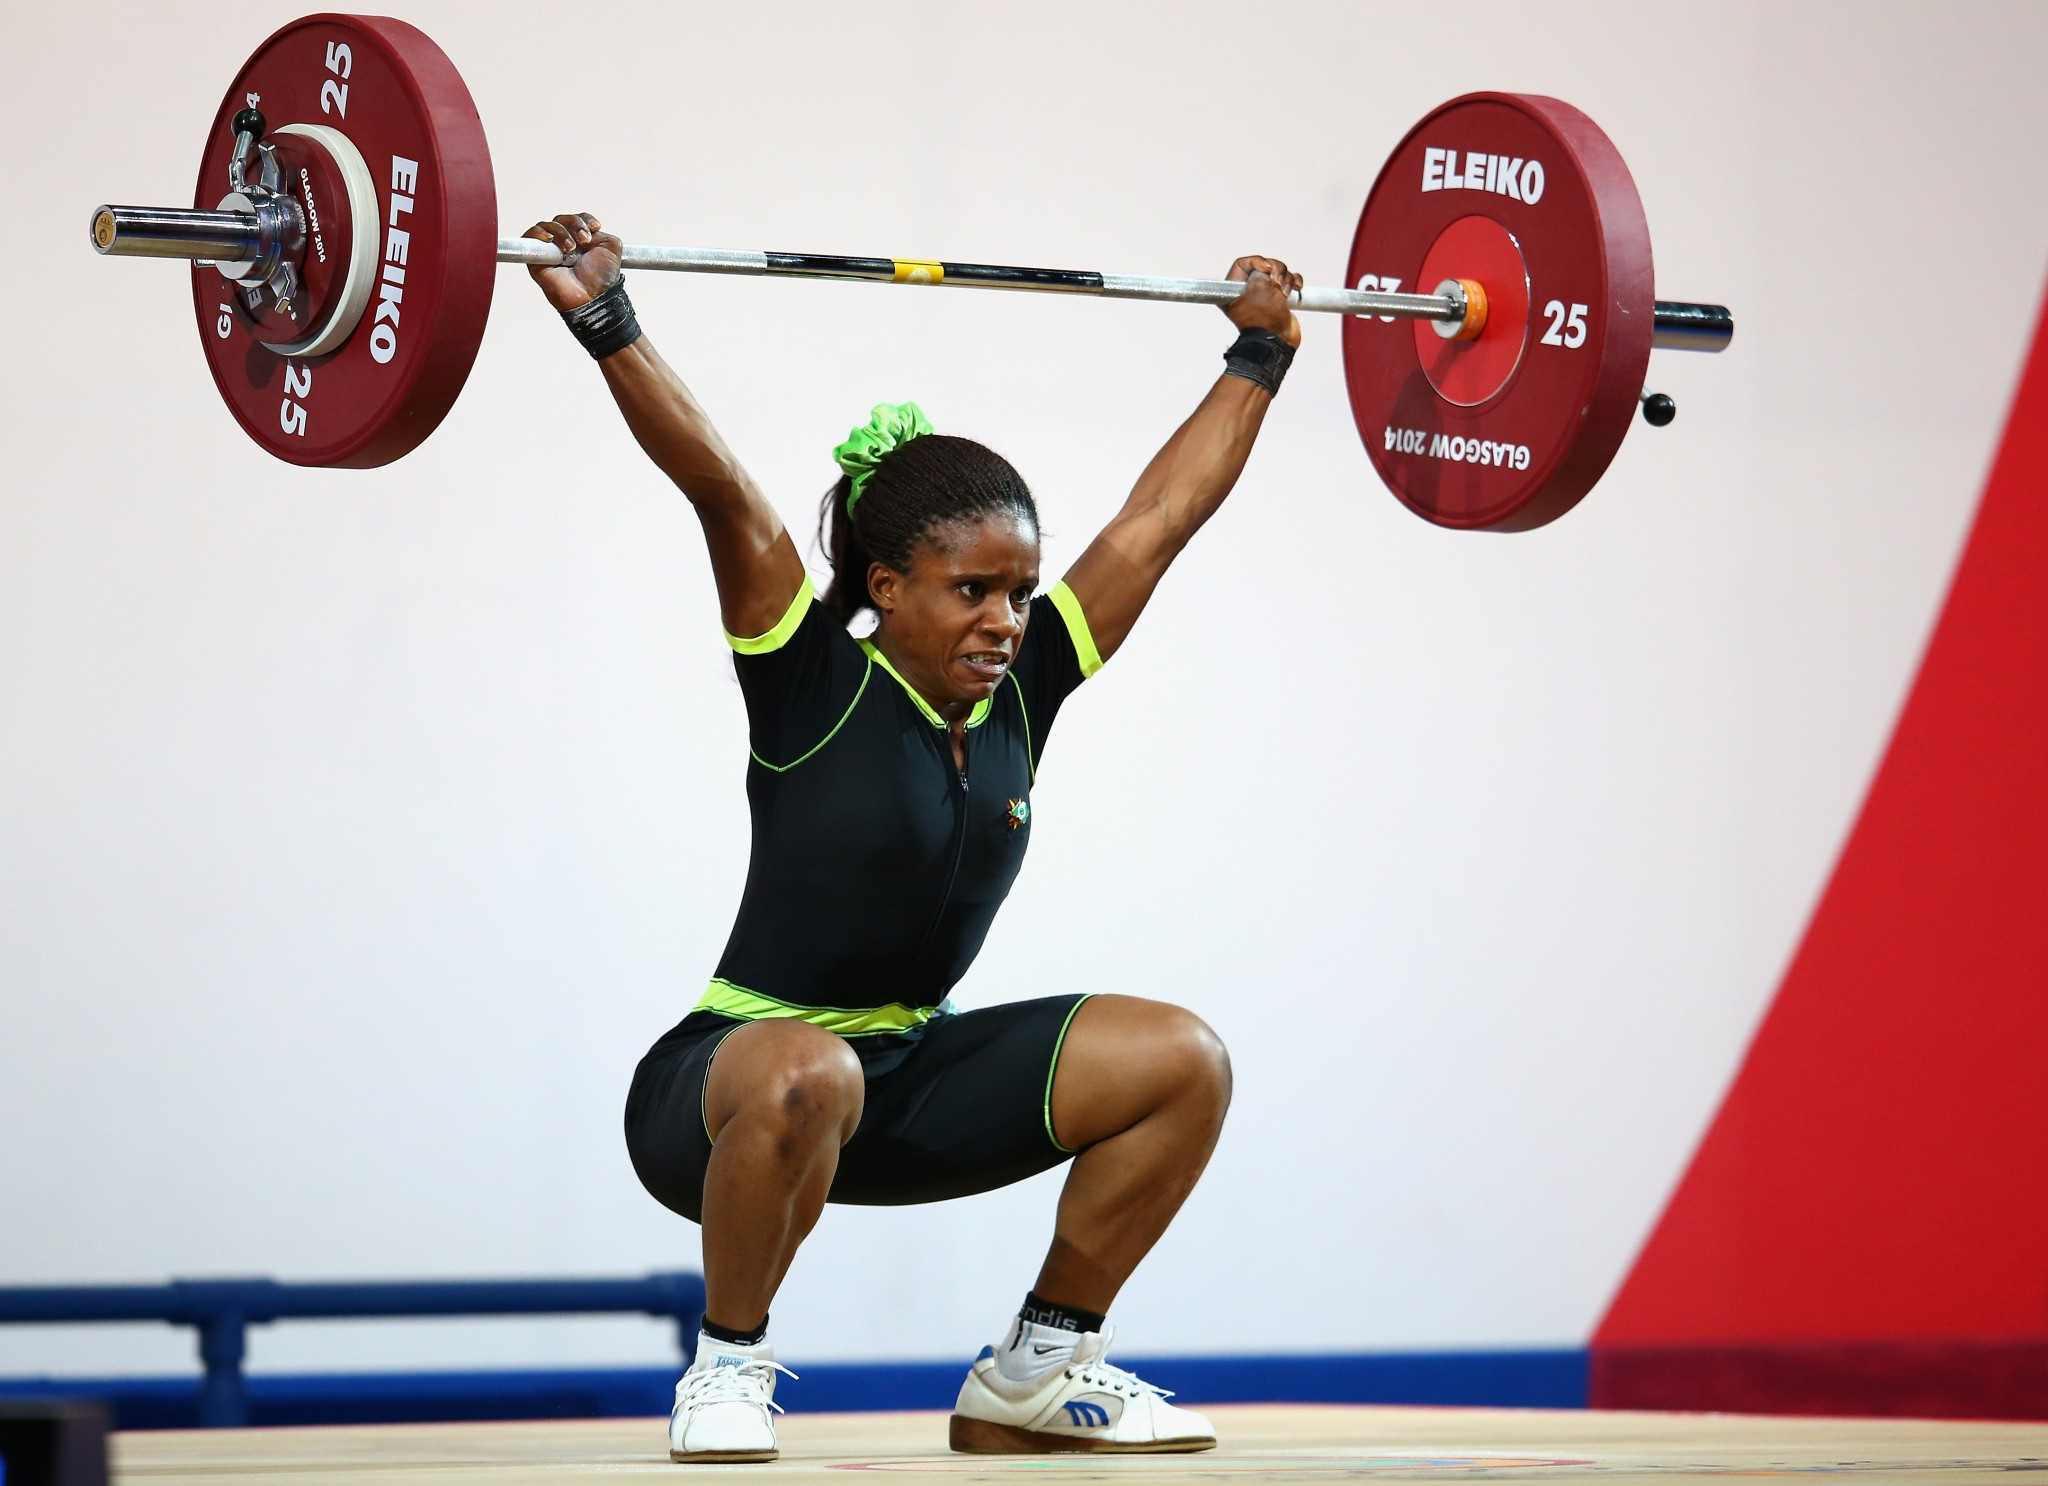 Chika Amalaha was stripped of her Glasgow 2014 Commonwealth Games gold medal following a failed drugs test ©Getty Images